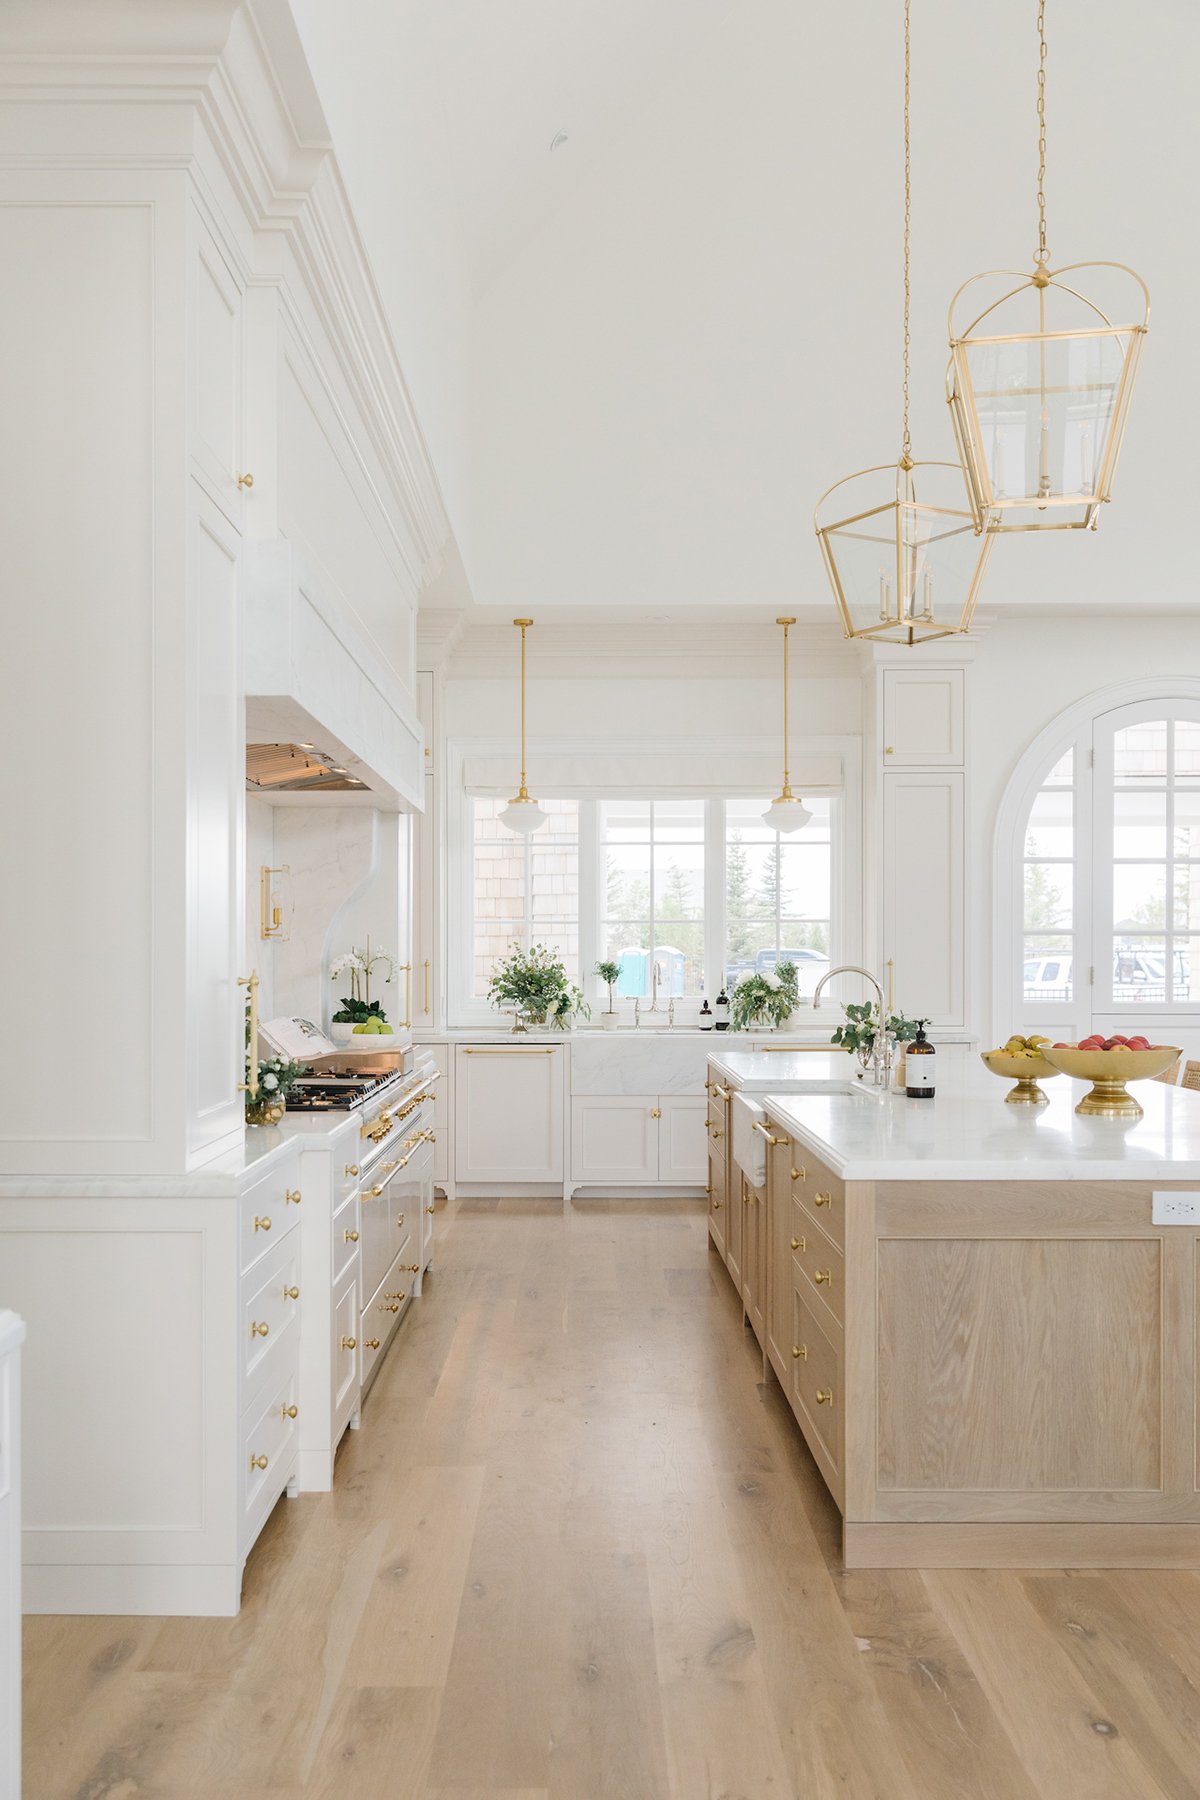 large kitchen with white cabinets, oak island and white countertops. All the fixtures are polished brass.